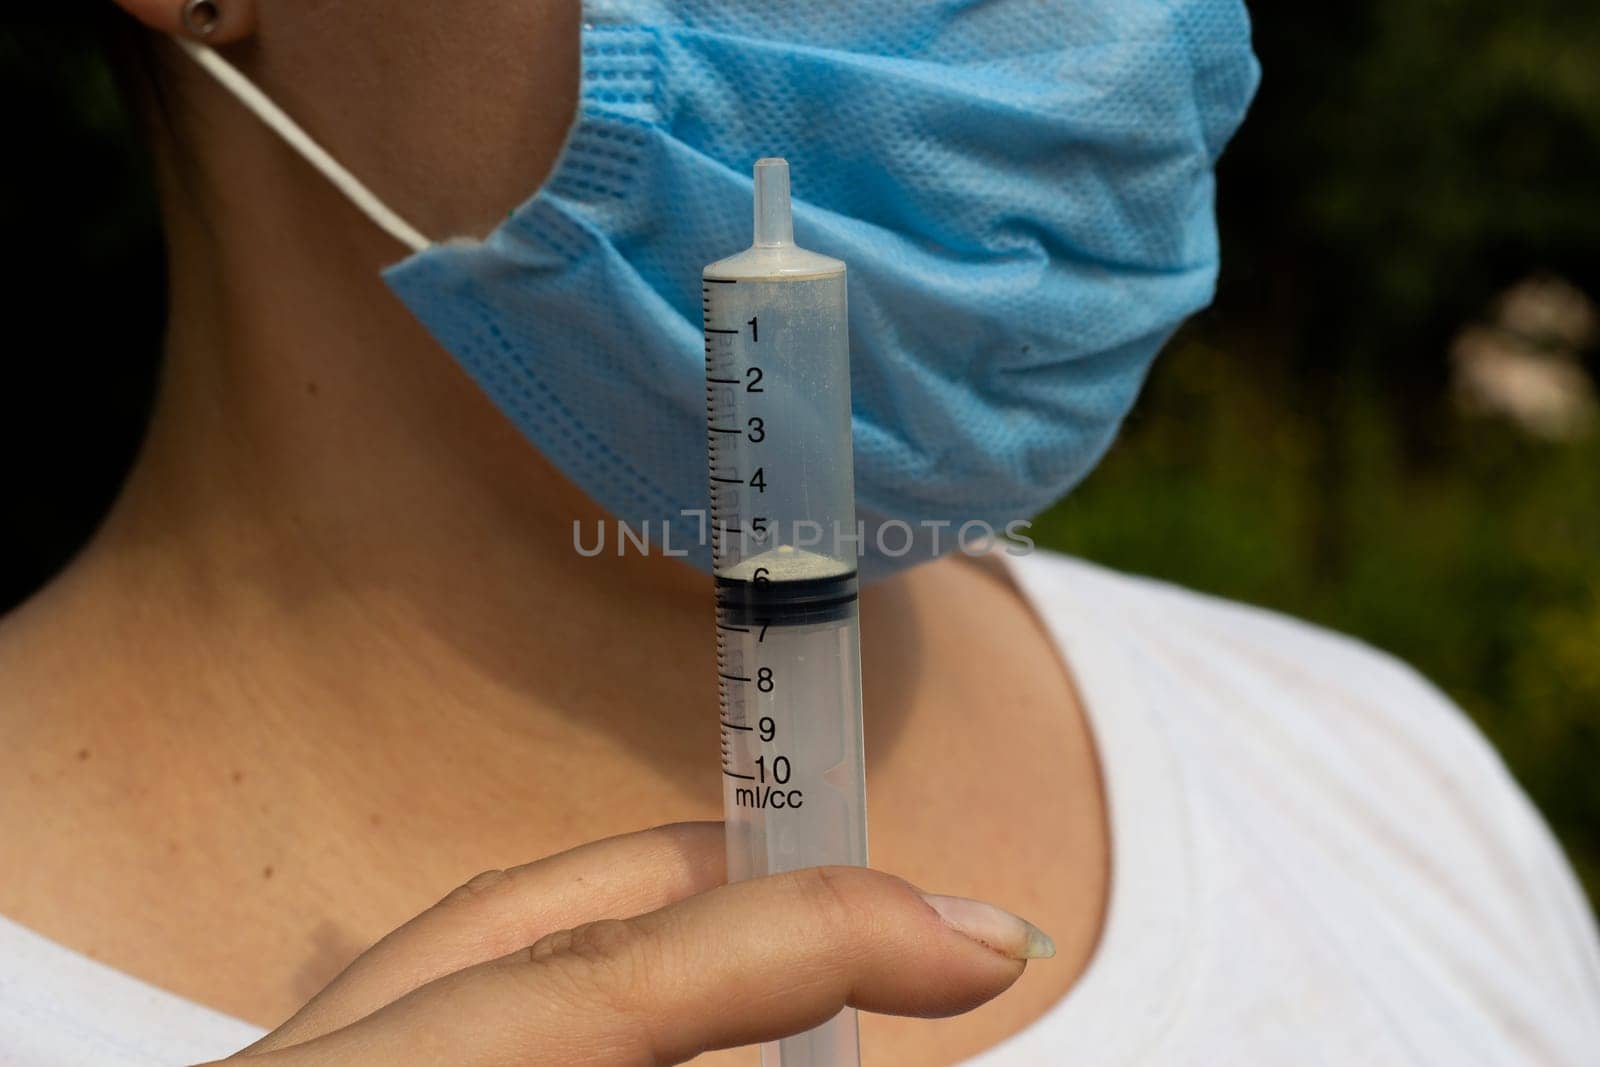 Female face in a medical blue mask and an empty syringe without a needle. Medical procedures. Health care. Prevention.